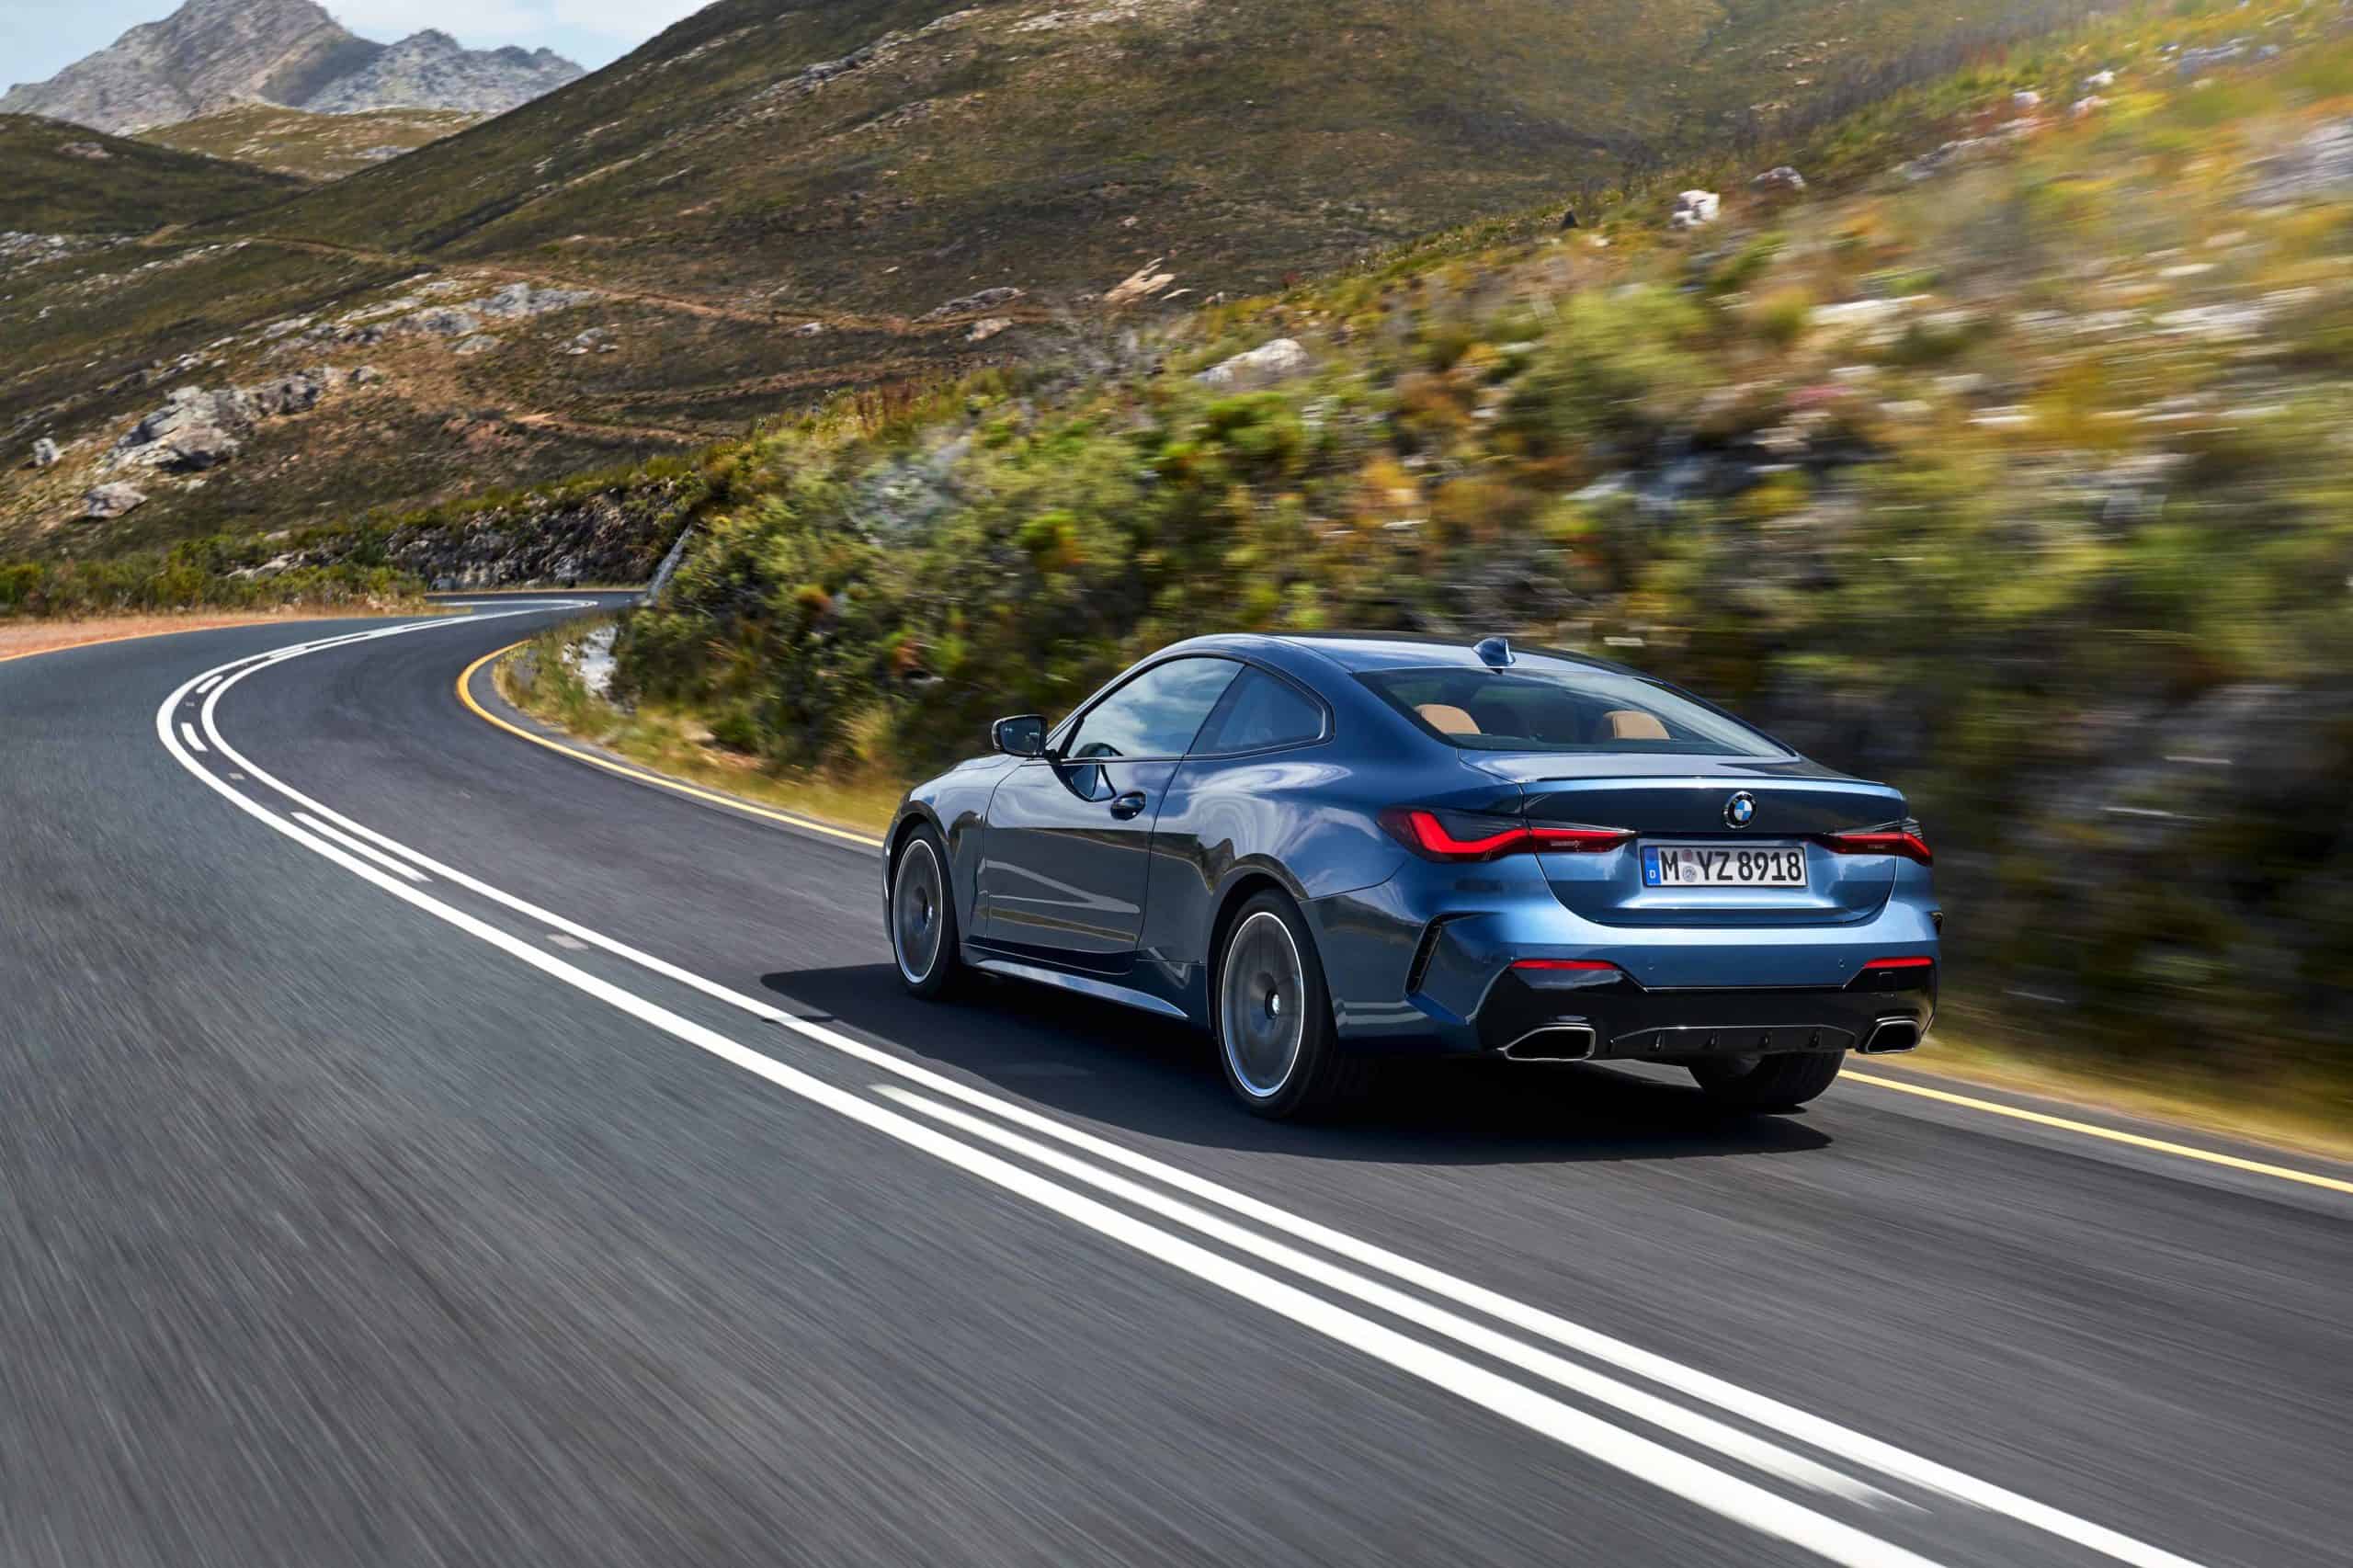 2021 BMW Coupe on mtn road